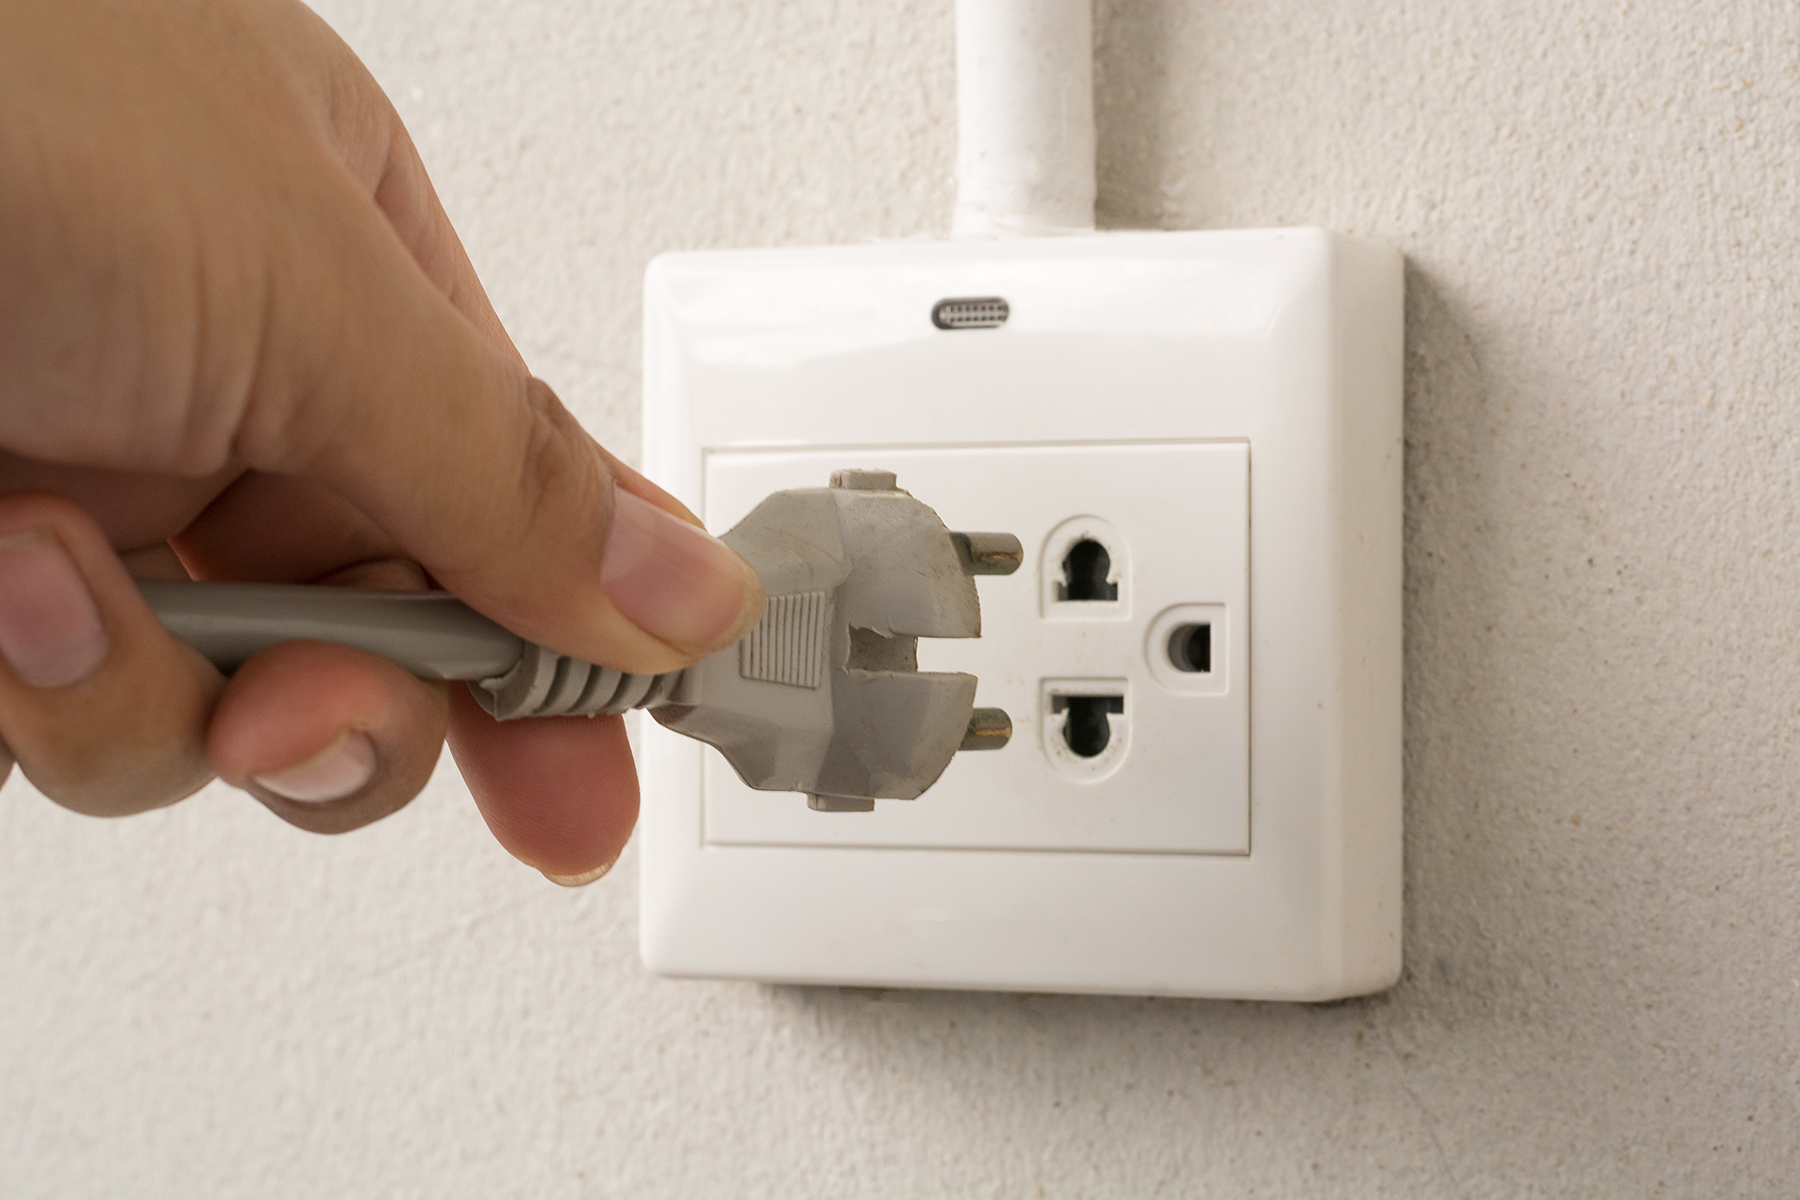 A hand about to plug a plug into an outlet